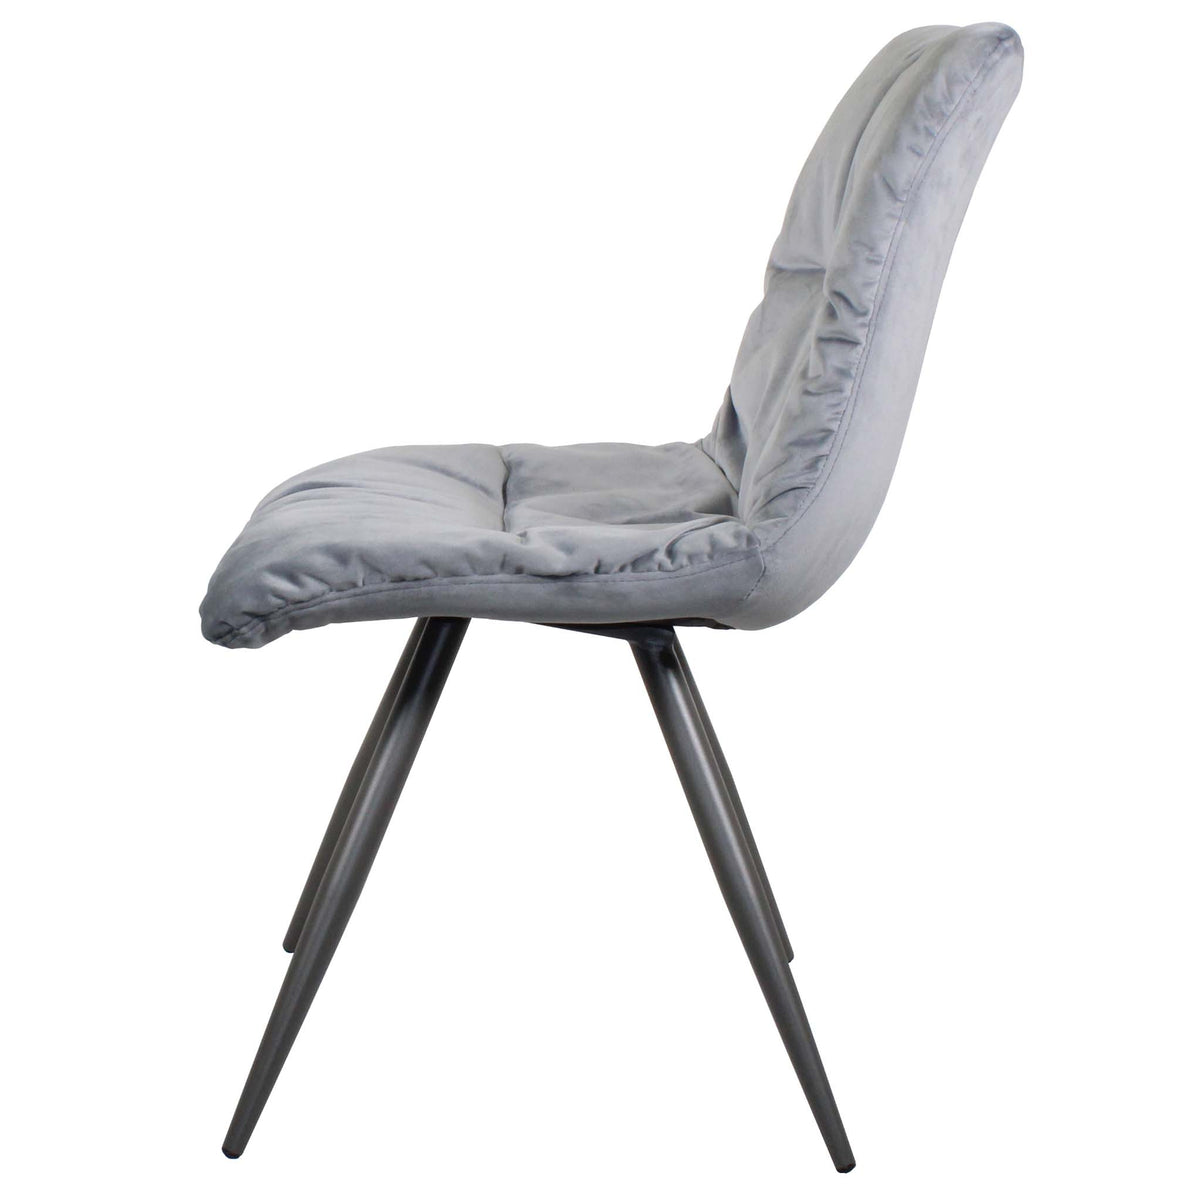 Side view of the Light Grey Addison Velvet Chair from Roseland Furniture